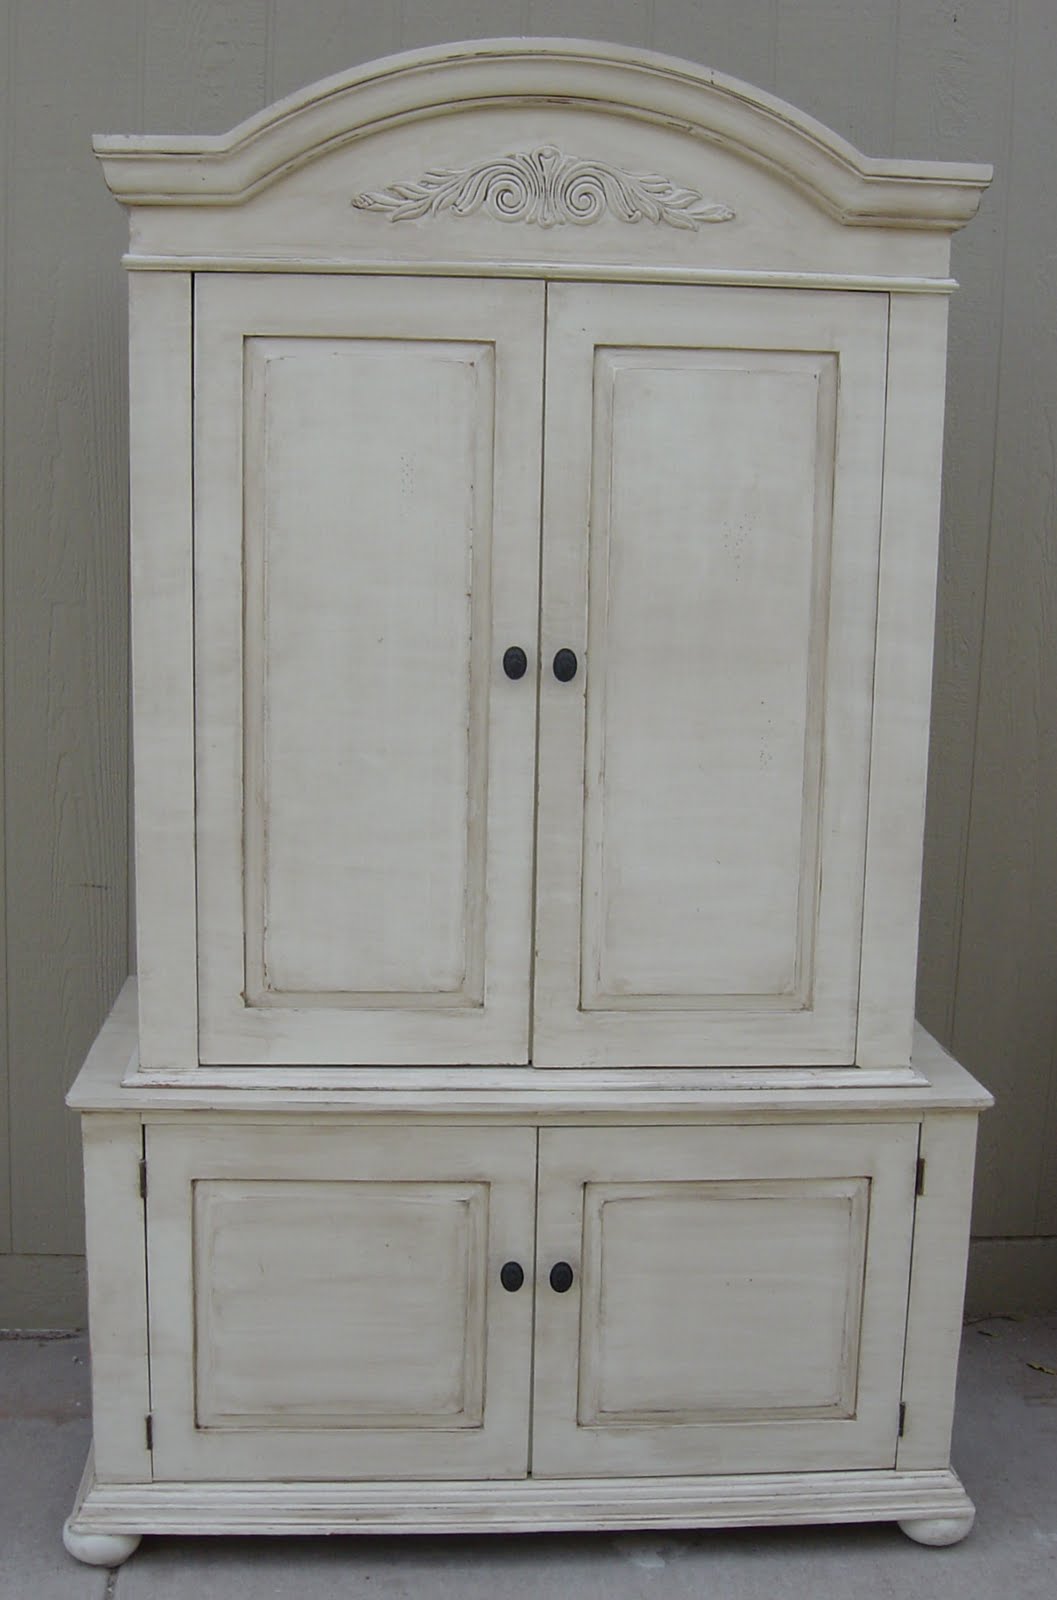 The Backyard Boutique by Five to Nine Furnishings: Creamy Shabby Chic Armoire1057 x 1600